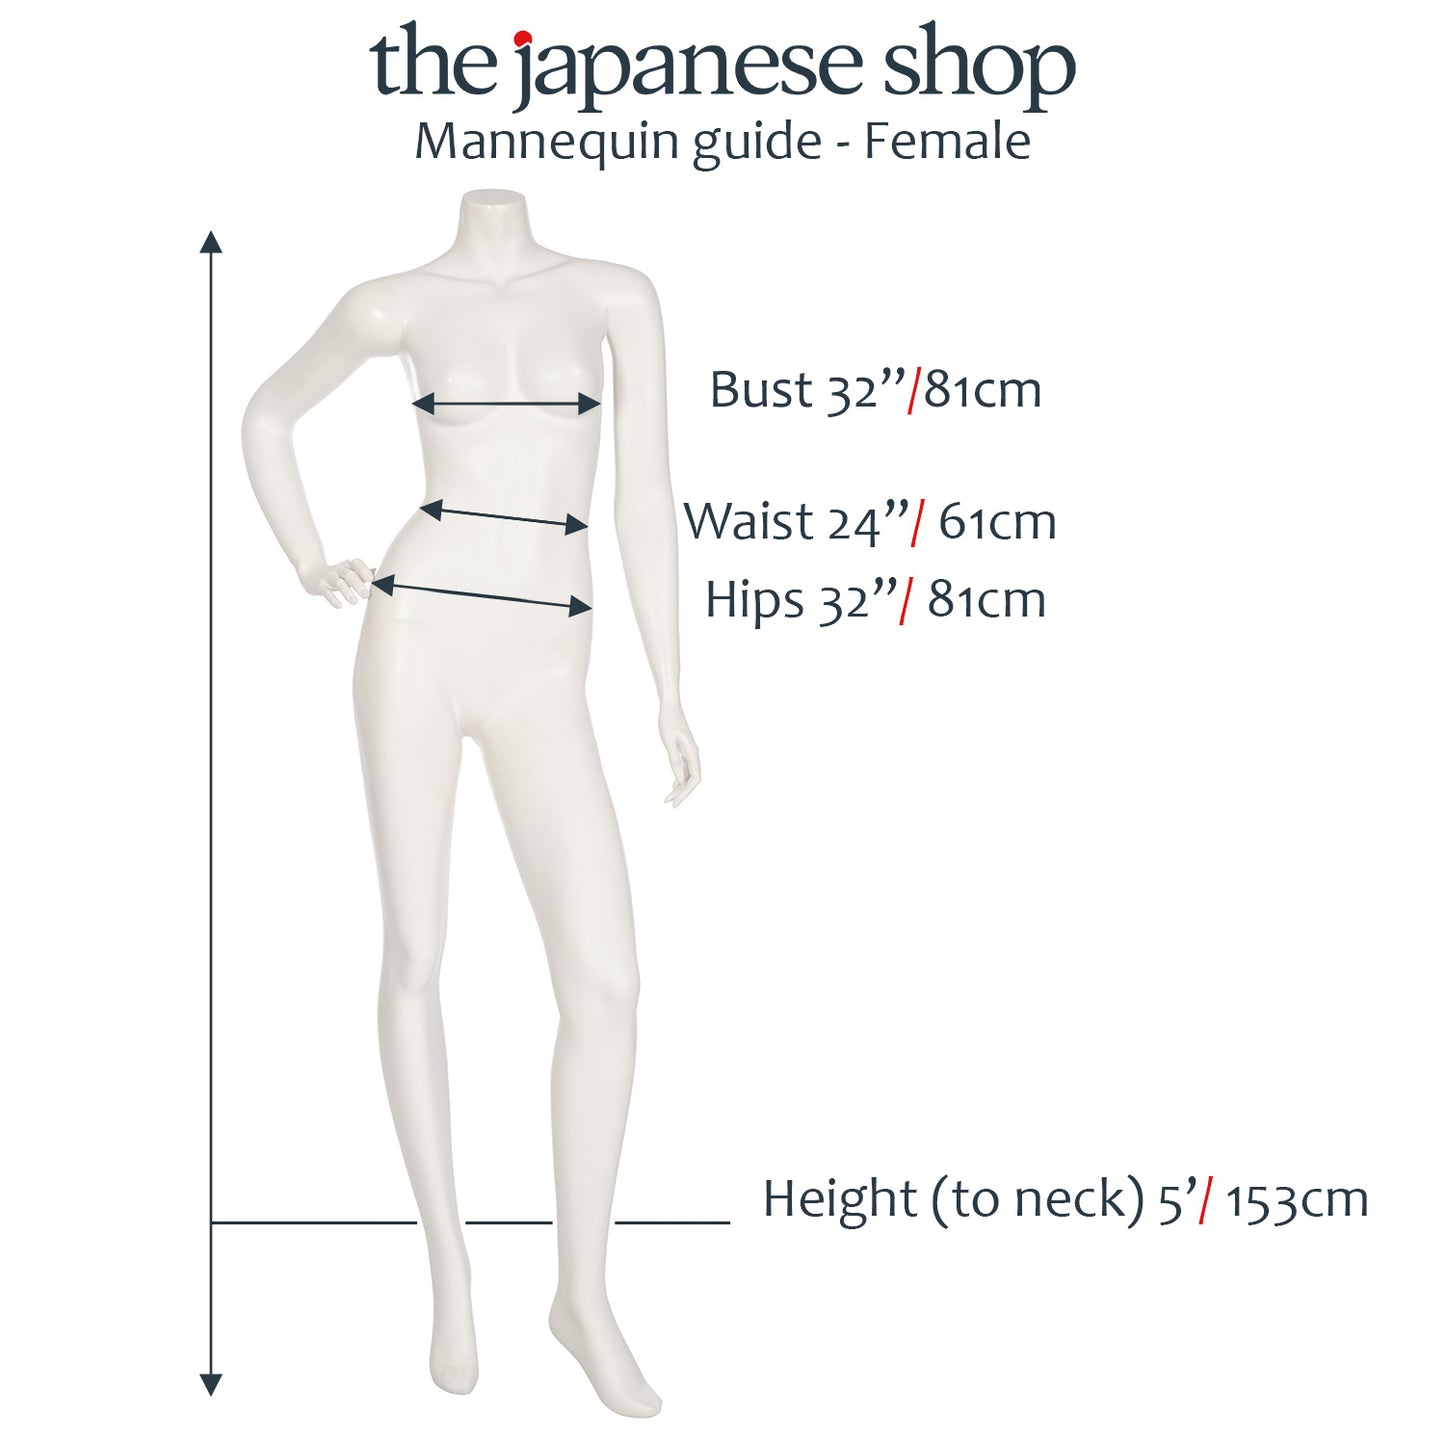 Female Mannequin Size Guide